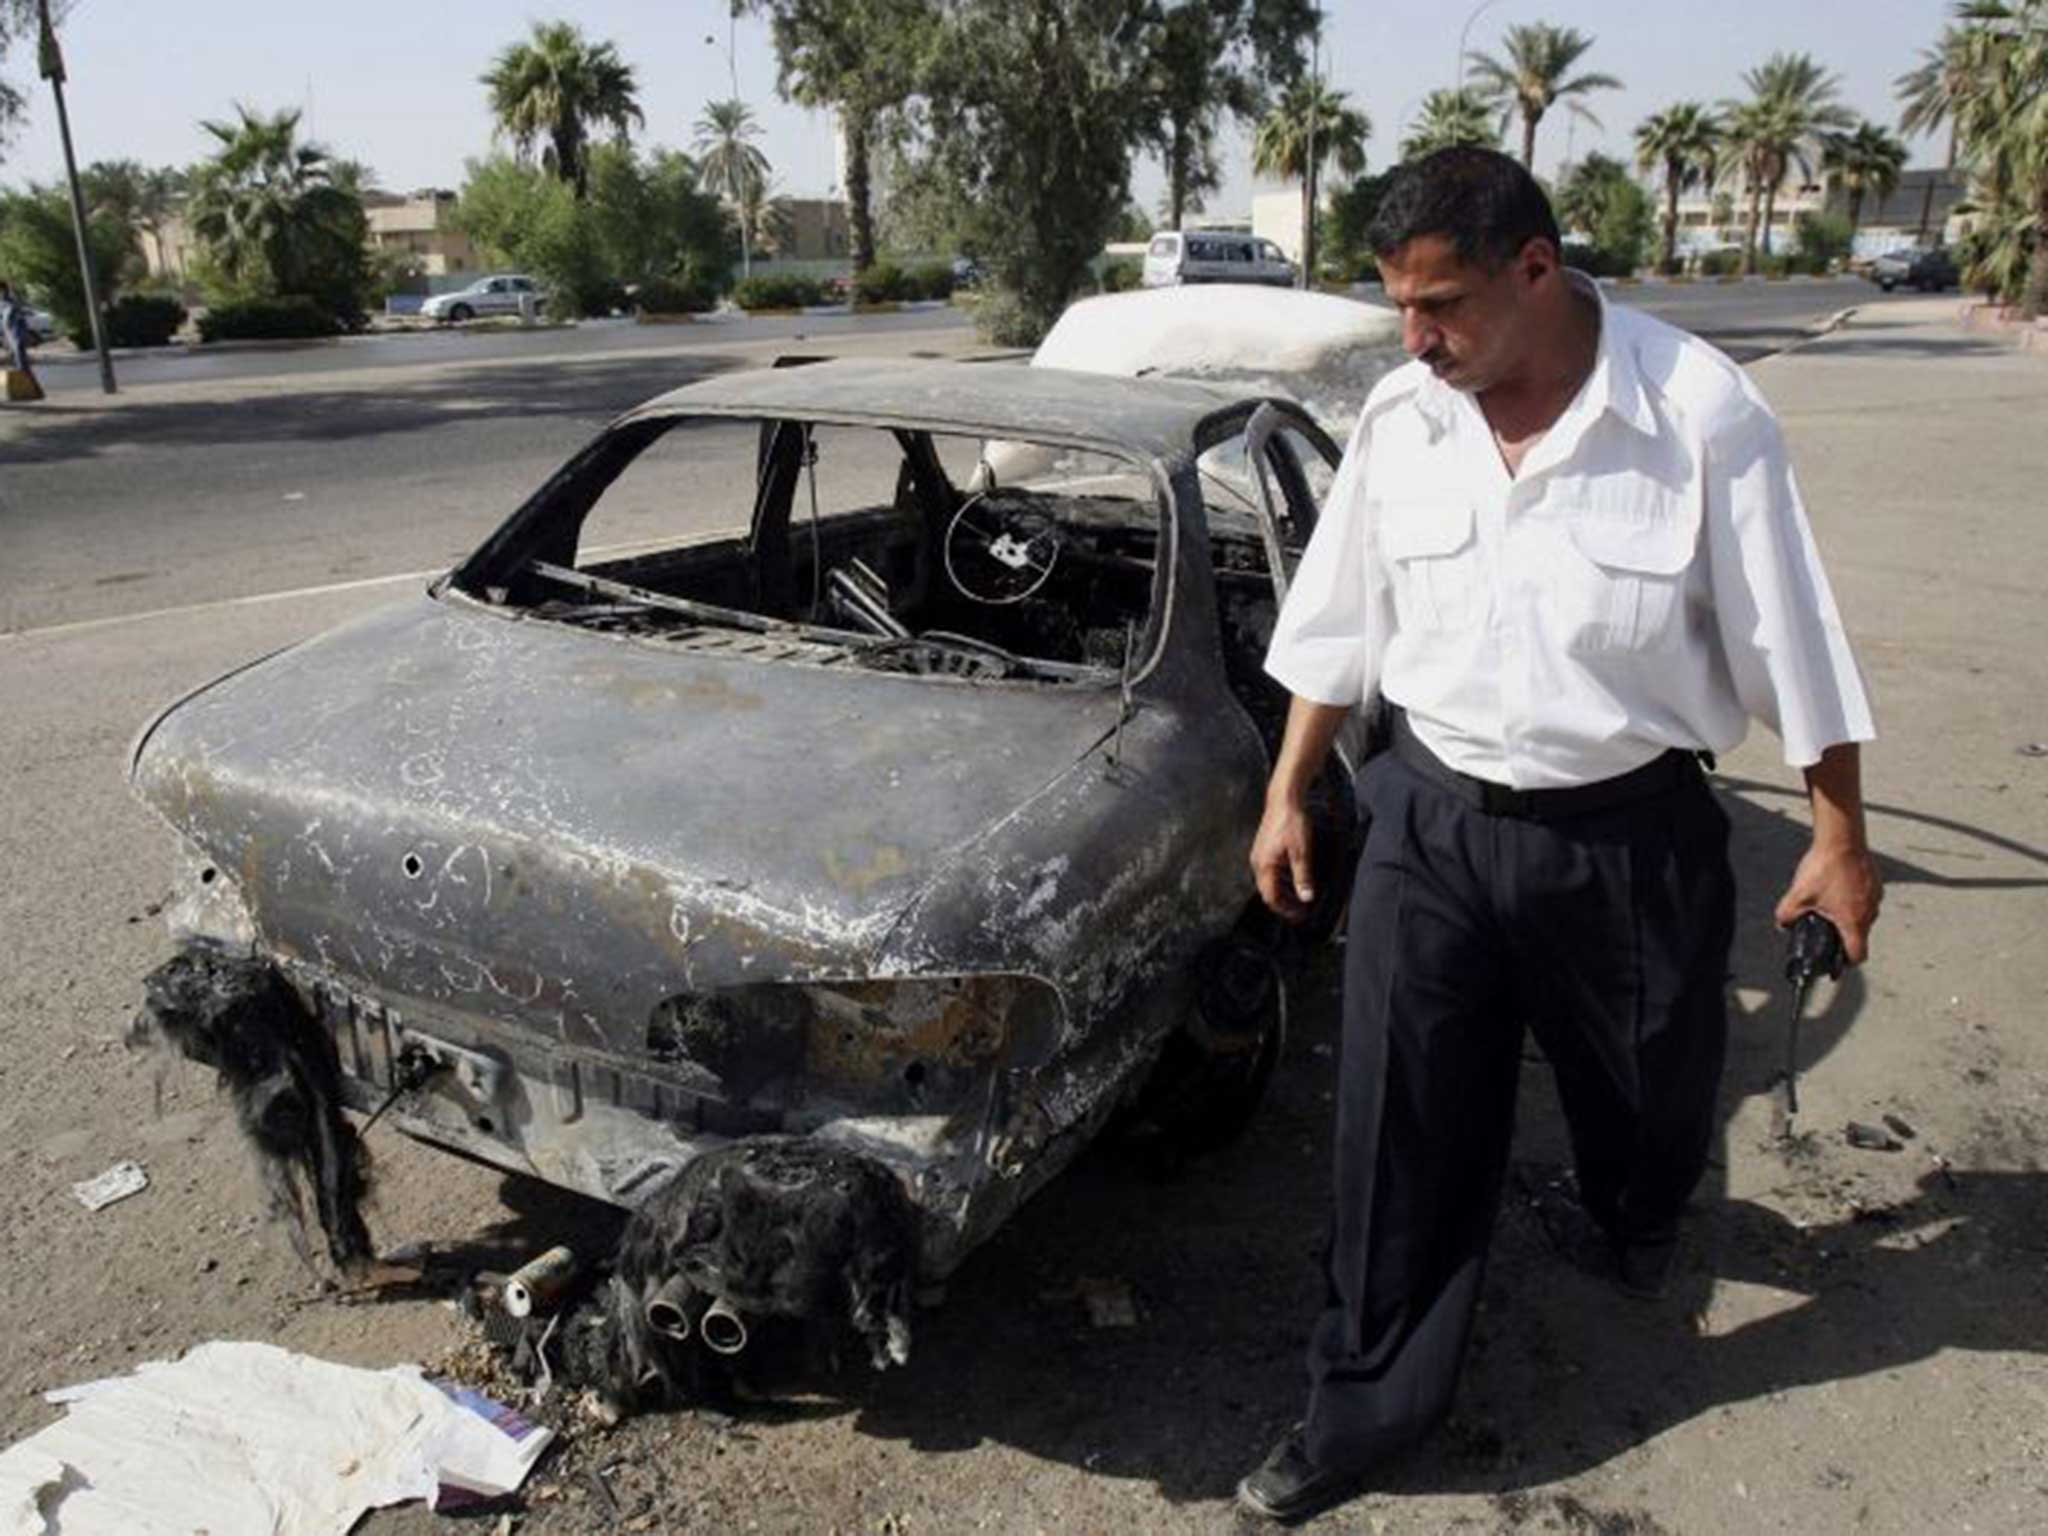 A man inspects a car destroyed by Blackwater operatives